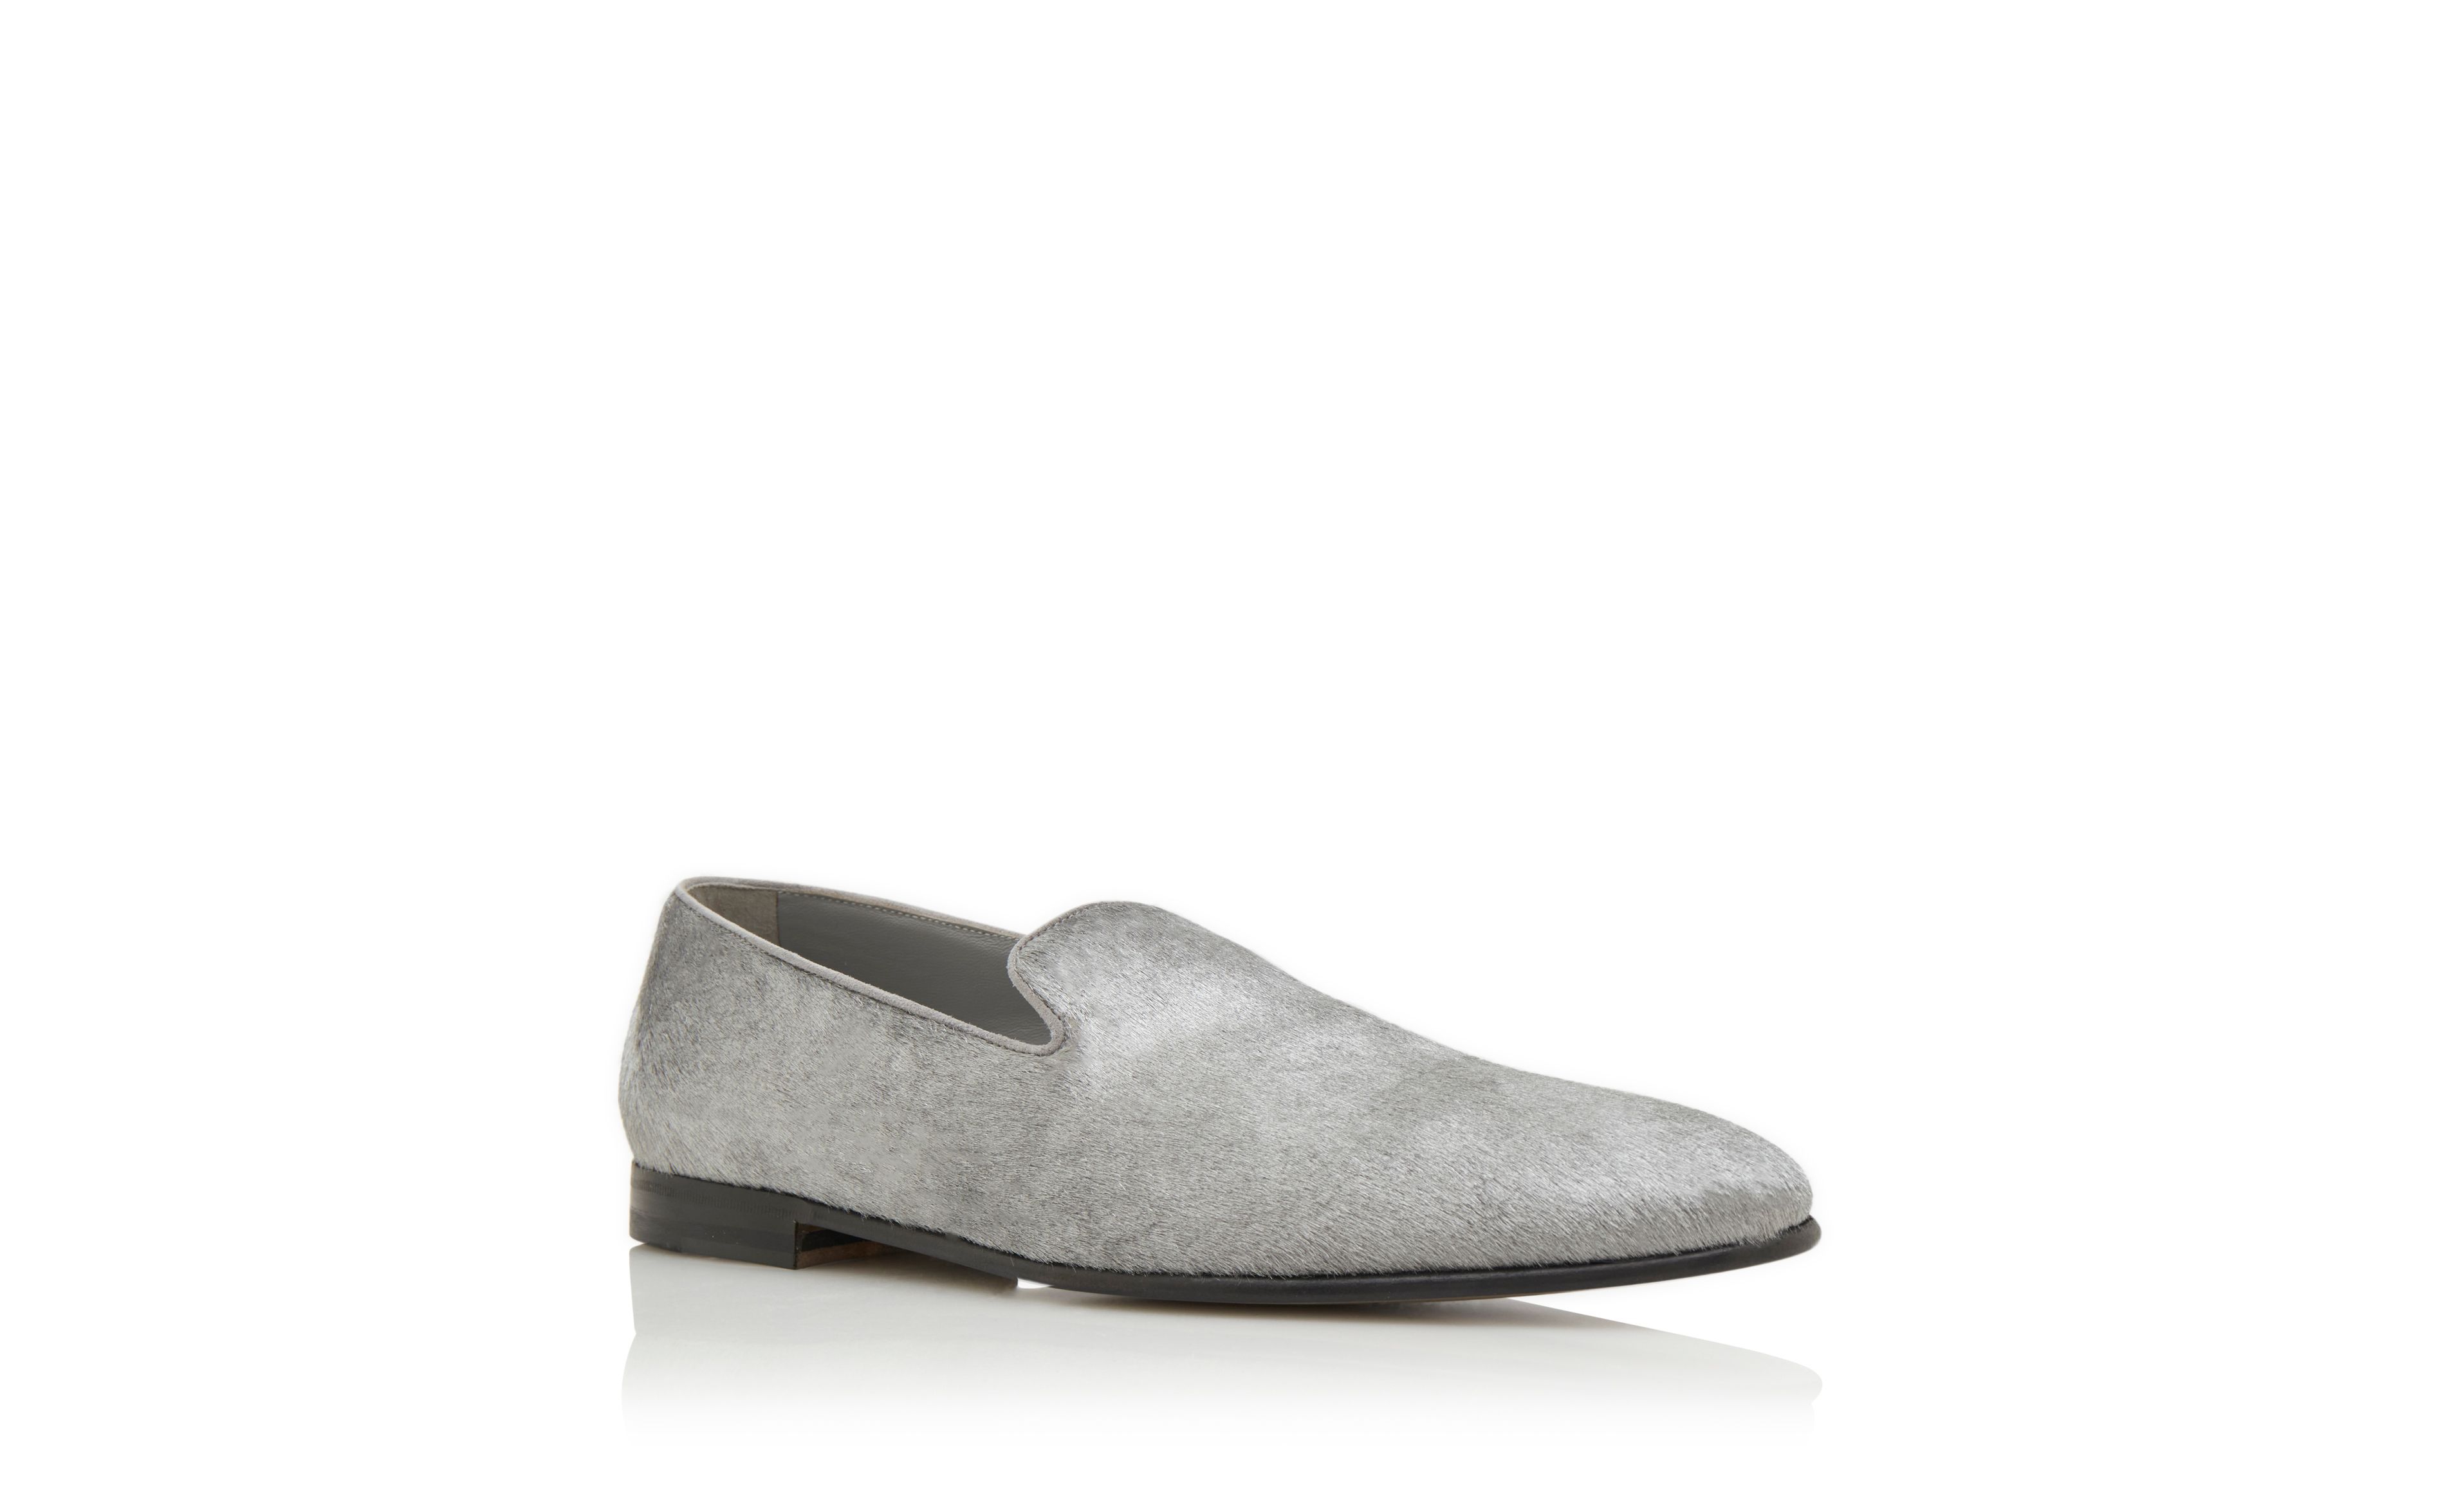 Designer Silver Calf Hair Loafers - Image Upsell